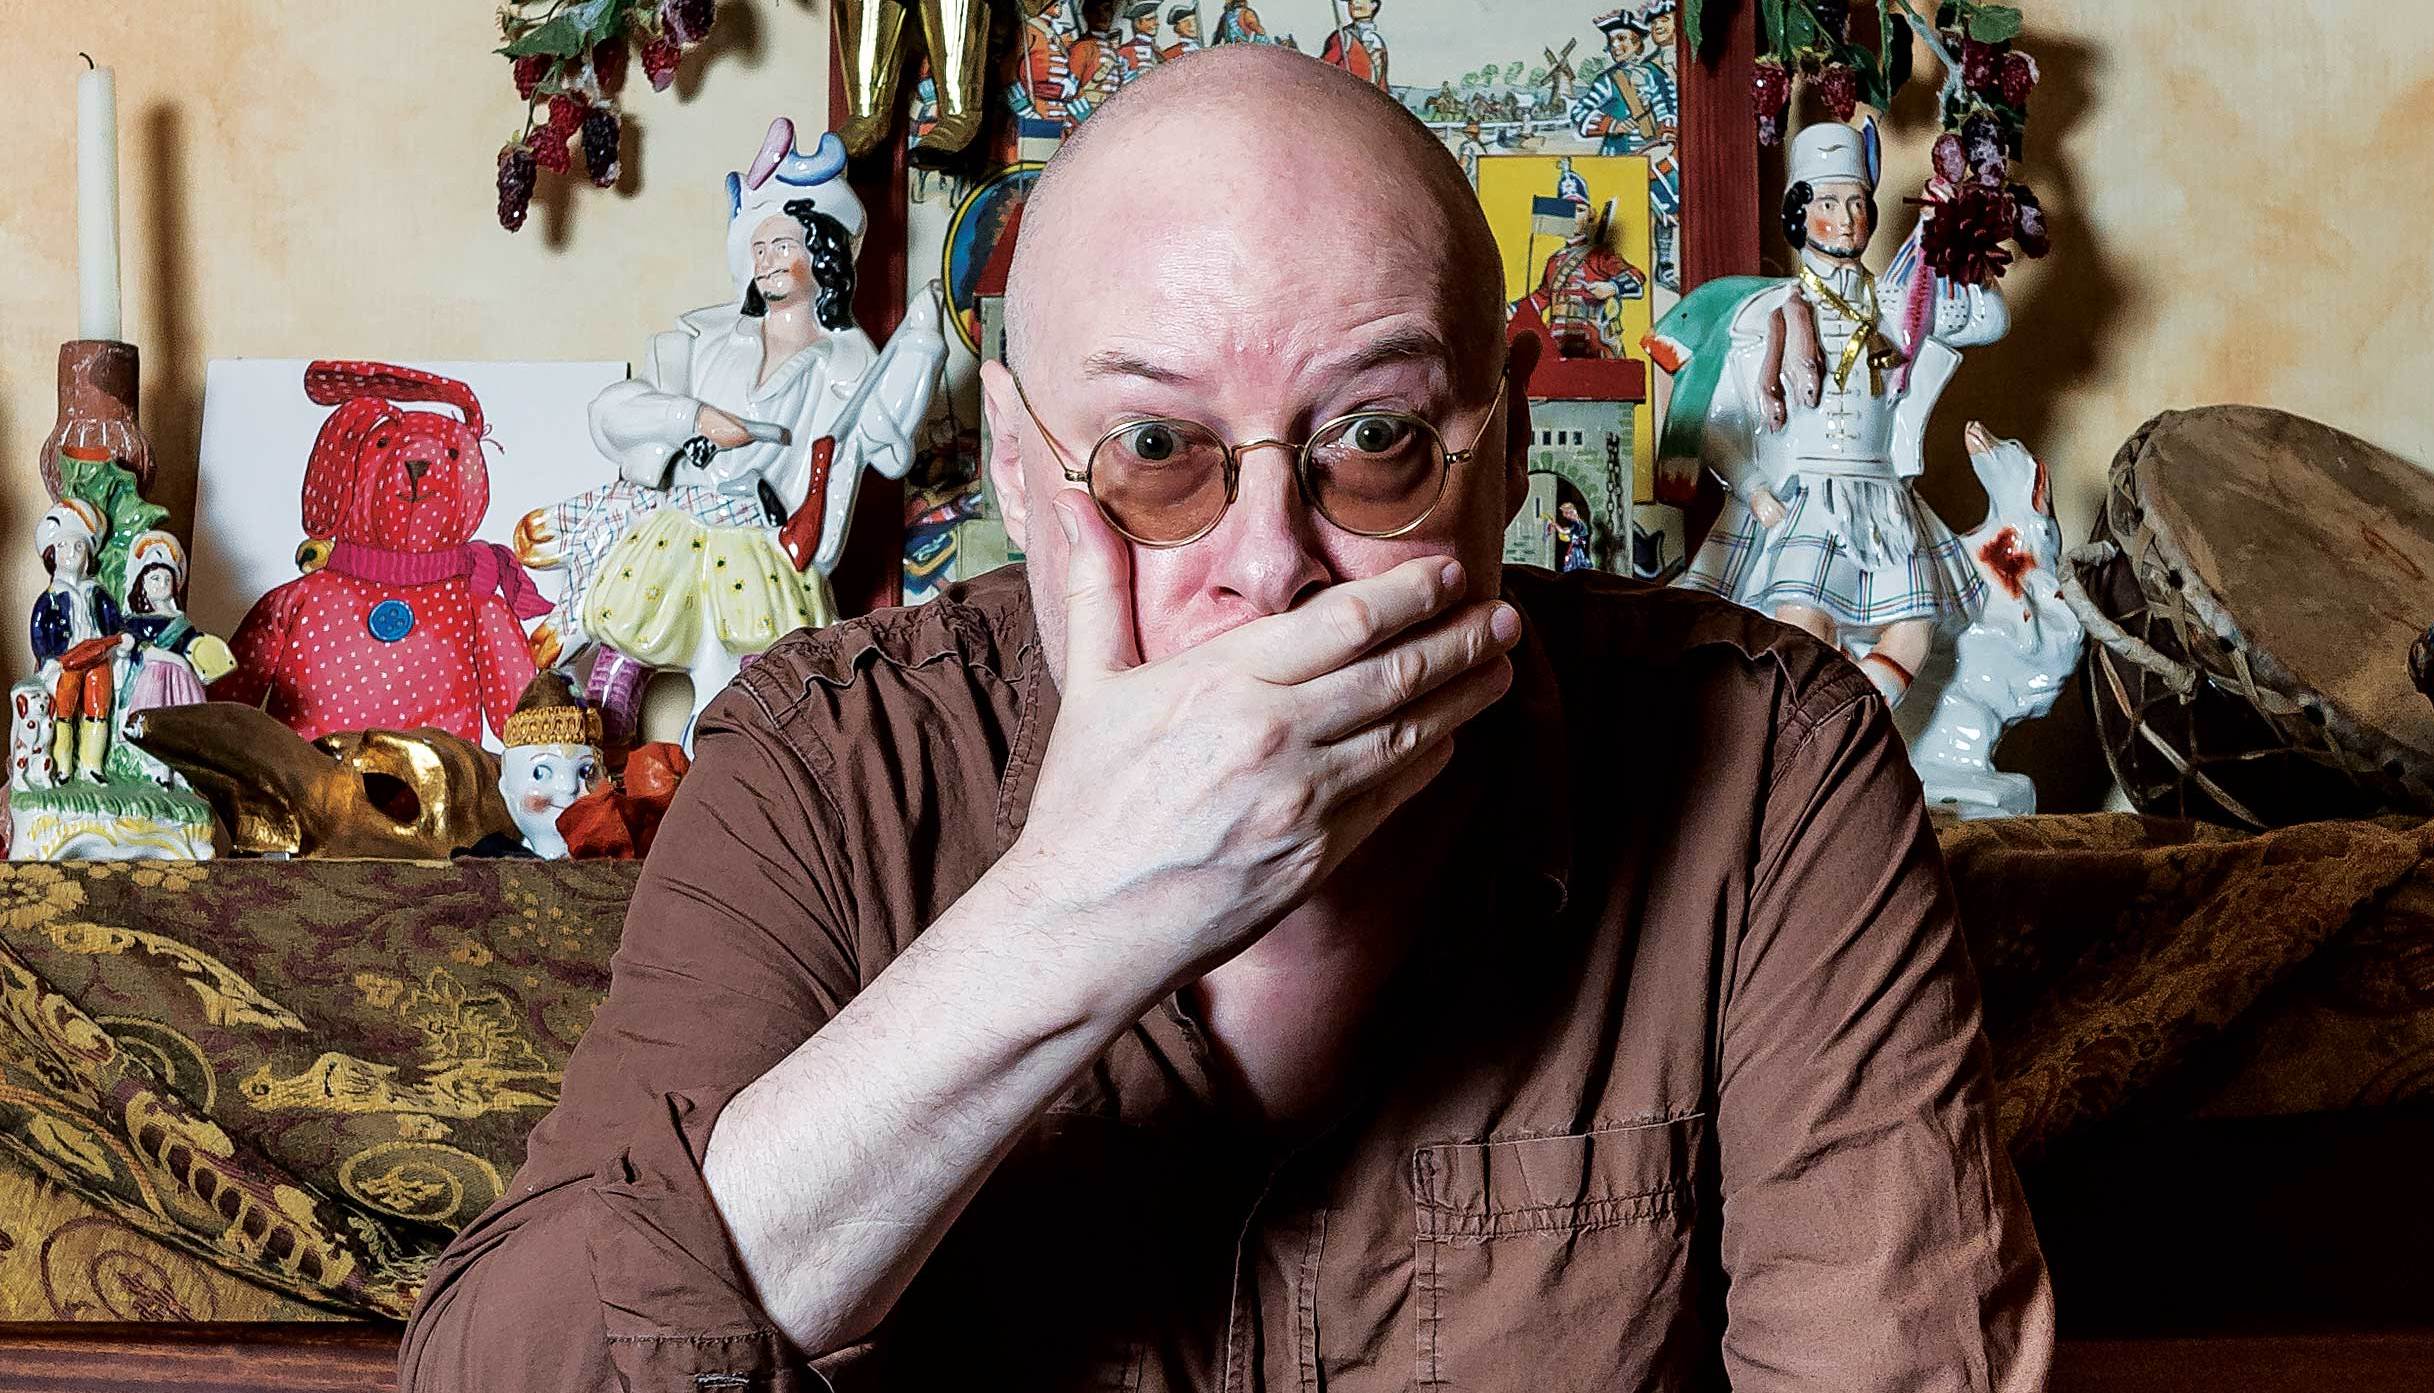 “Colin Moulding was deemed the good-looking one who wrote the singalong stuff, so he mostly got the A-sides. And because I was the weird specky one, I used to get the B-sides”: XTC’s Andy Partridge looks back and forward